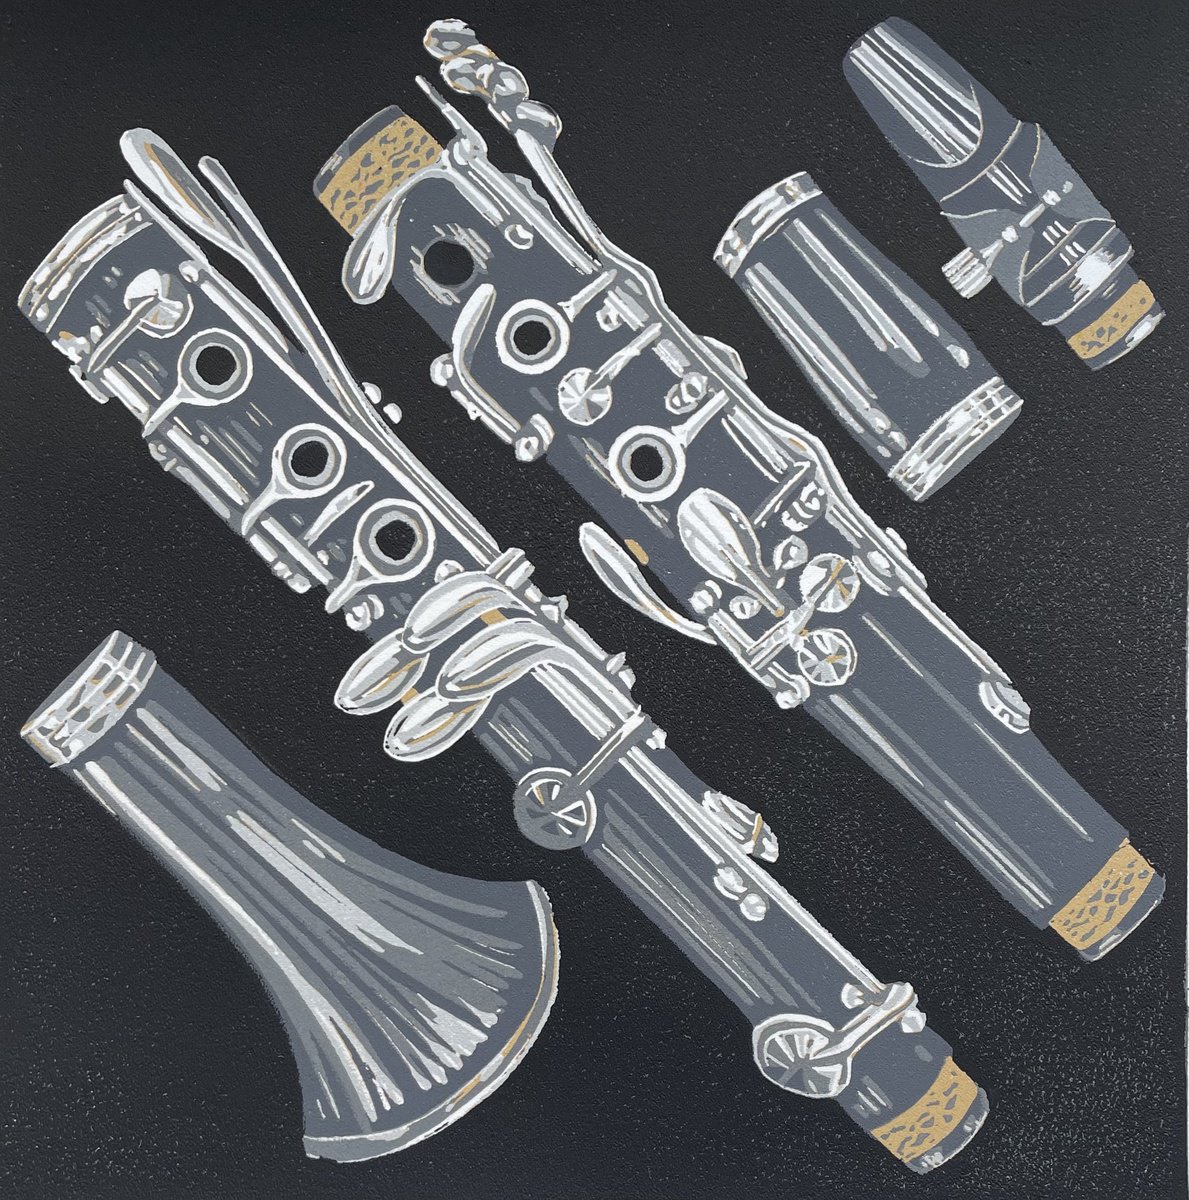 Clarinet by Gerry Coles